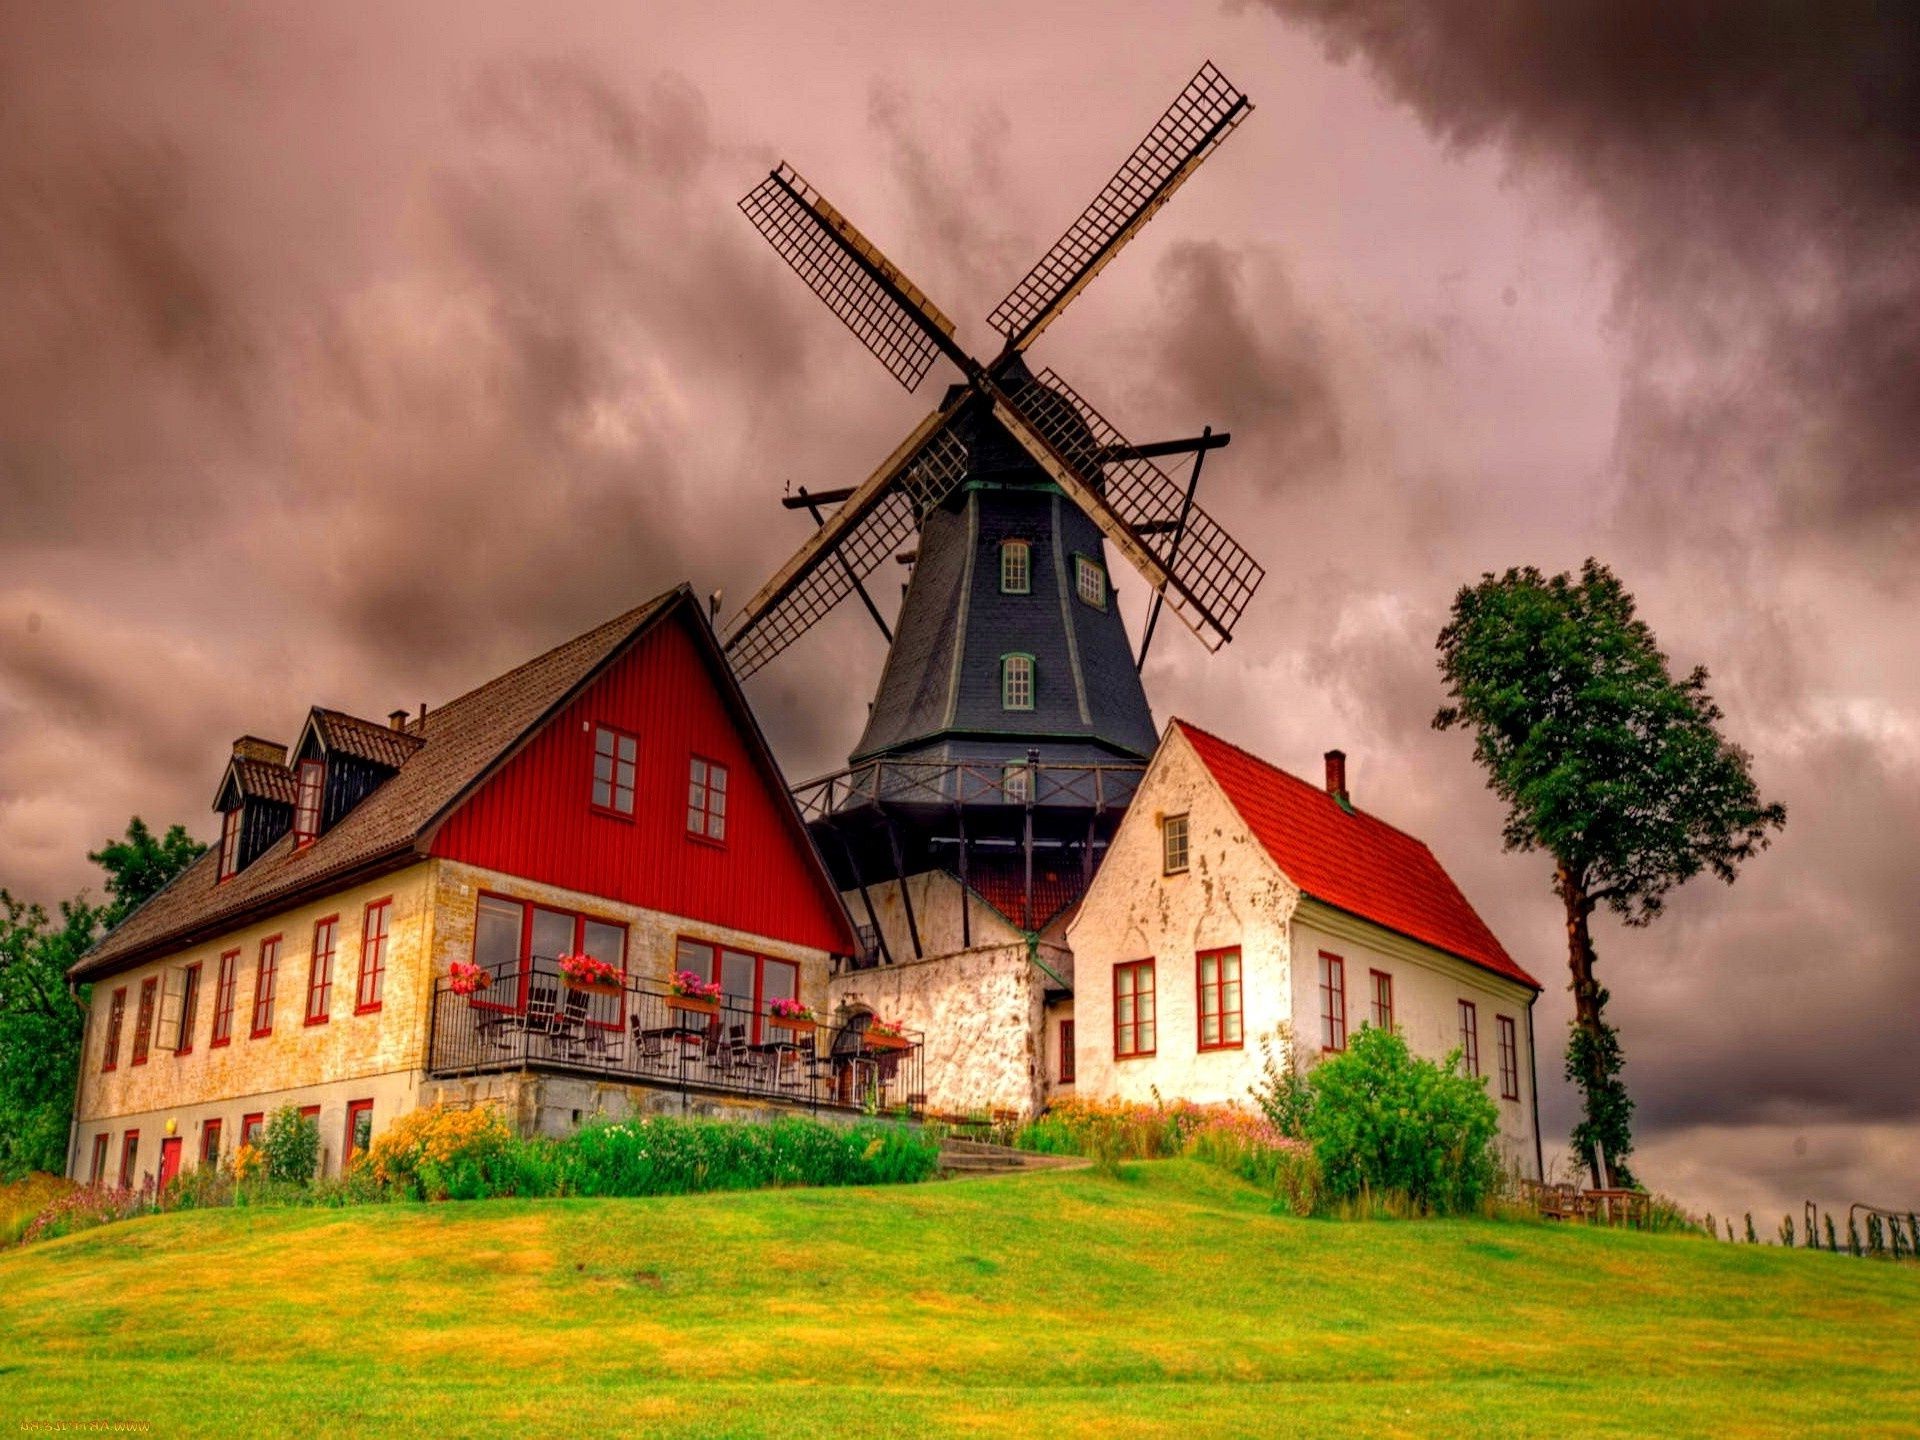 houses and cottages windmill architecture house sky outdoors grass rural farm countryside building landscape travel nature old traditional grinder cloud agriculture